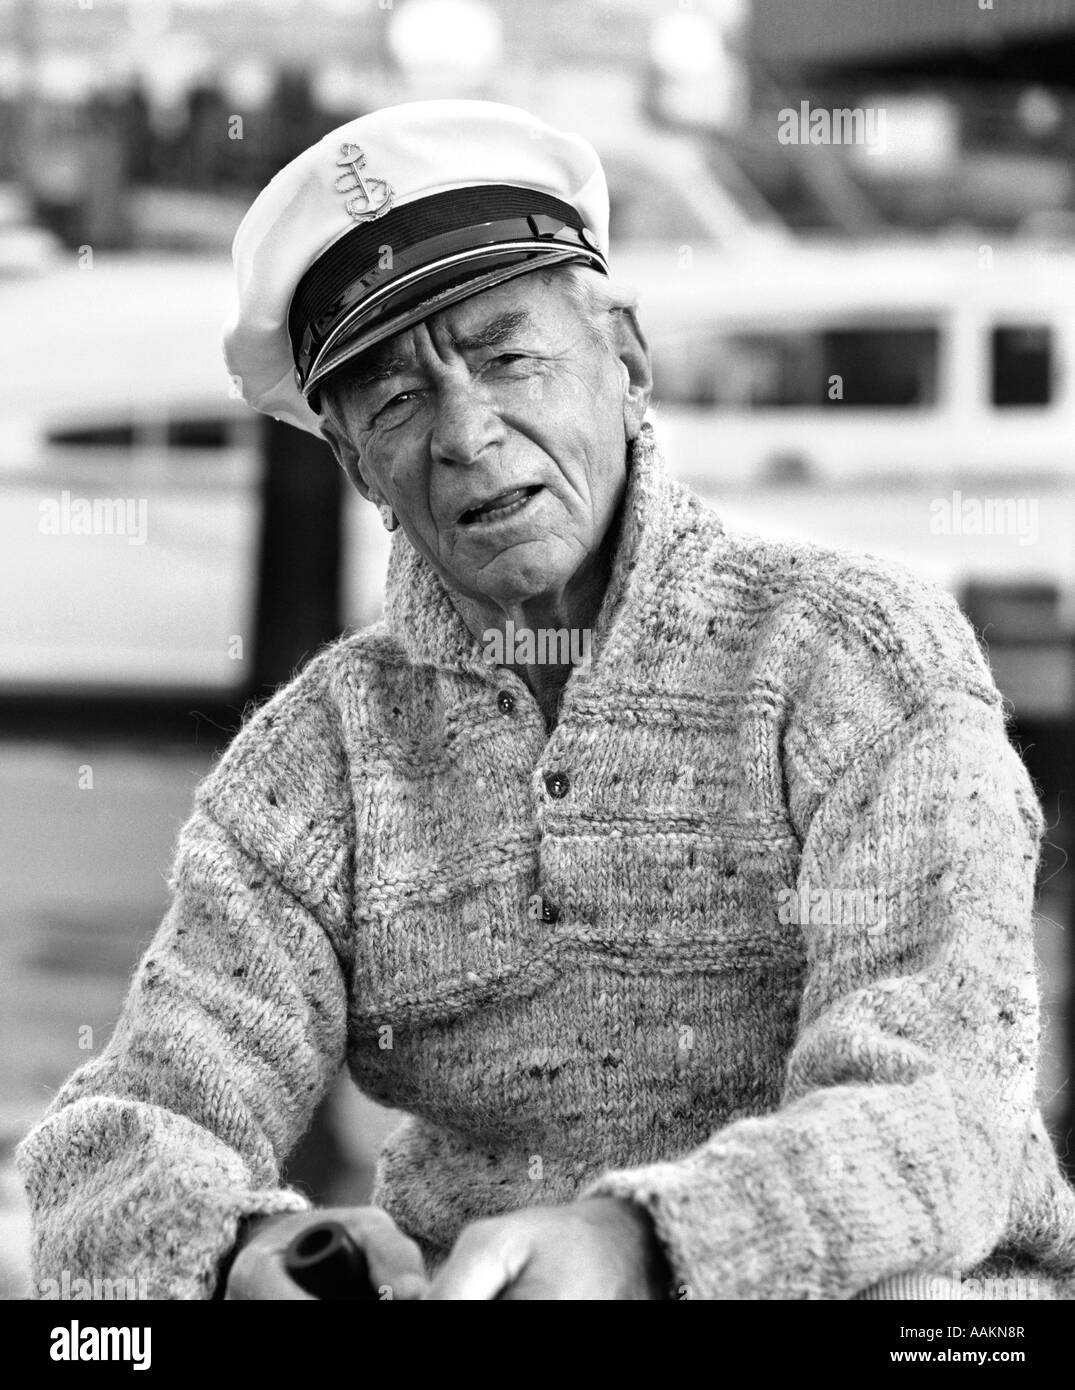 1970s OLDER MAN IN FISHERMAN'S HAT SWEATER HOLDING PIPE SITTING ON DOCKS OUTDOOR Stock Photo